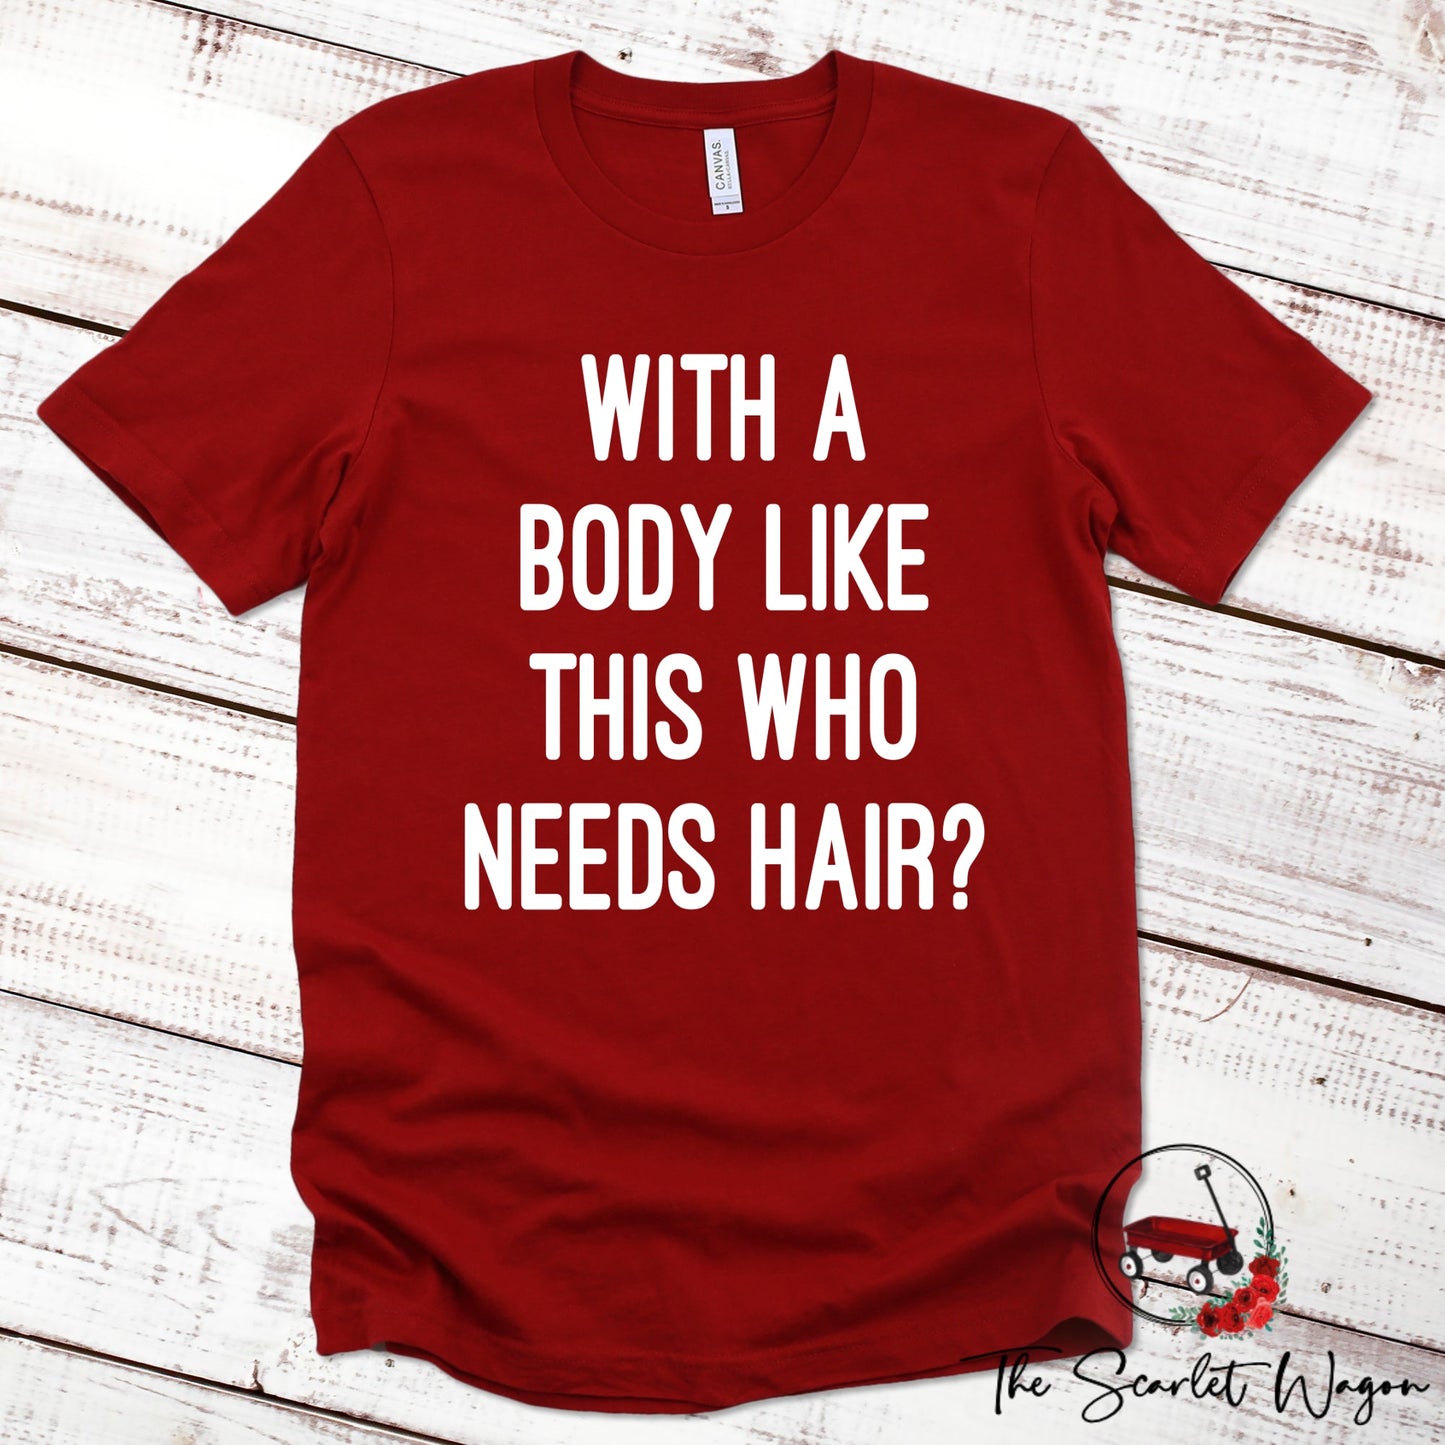 With a Body Like This Who Needs Hair Premium Tee Scarlet Wagon Red XS 